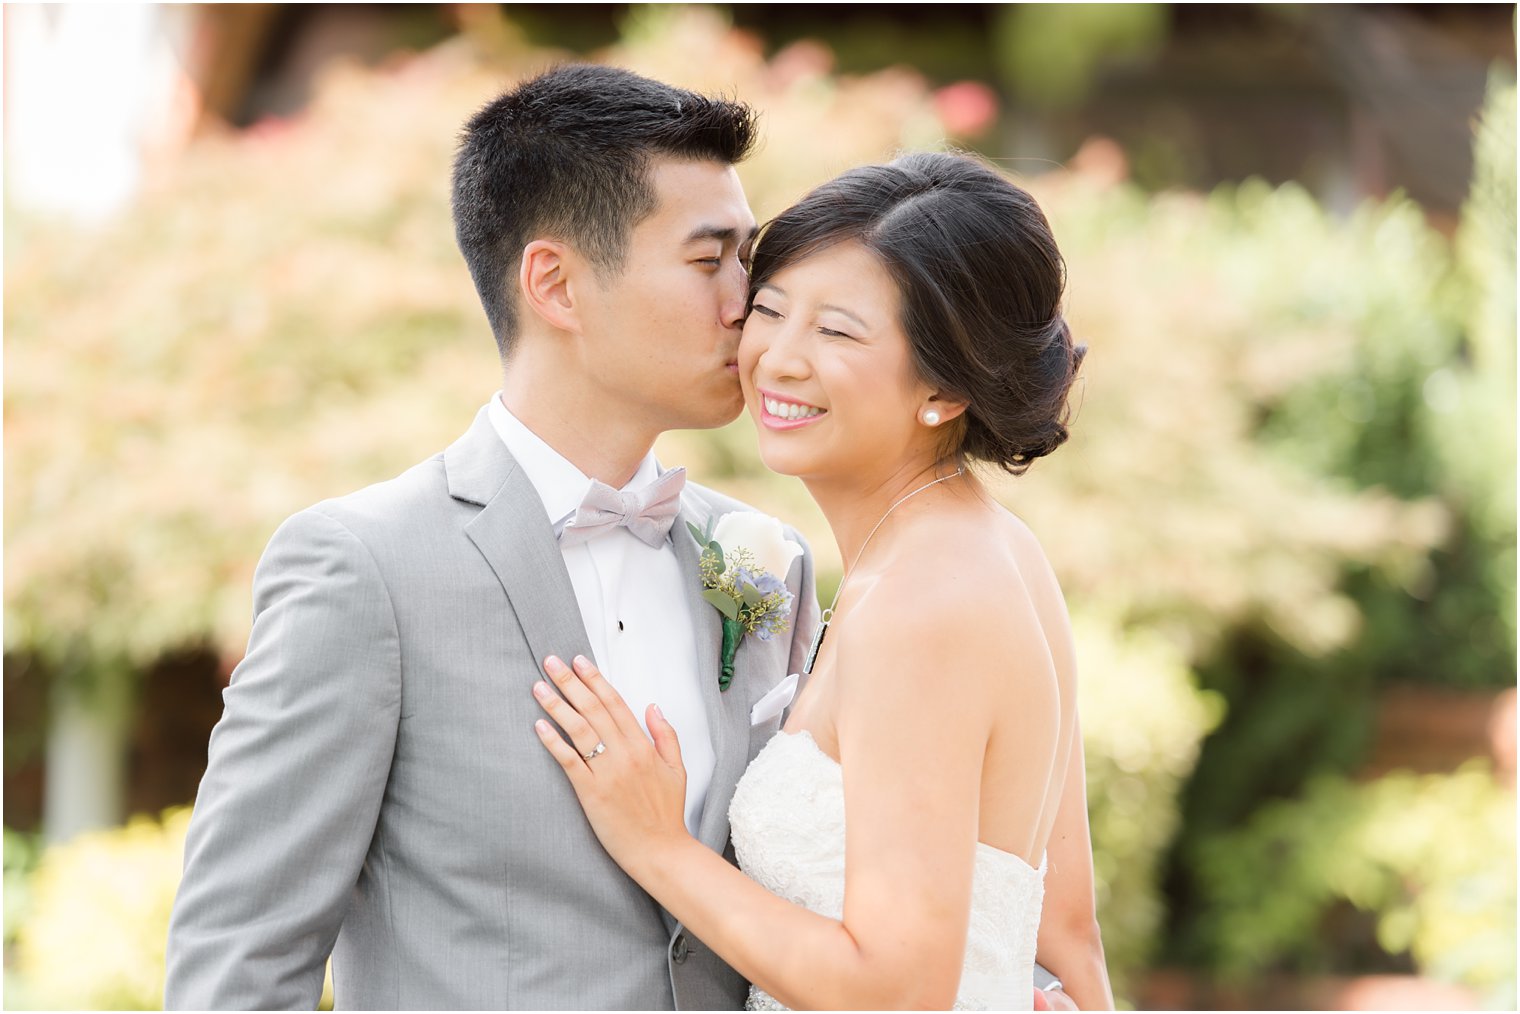 Groom gives bride a kiss during portraits with Idalia Photography in New Jersey